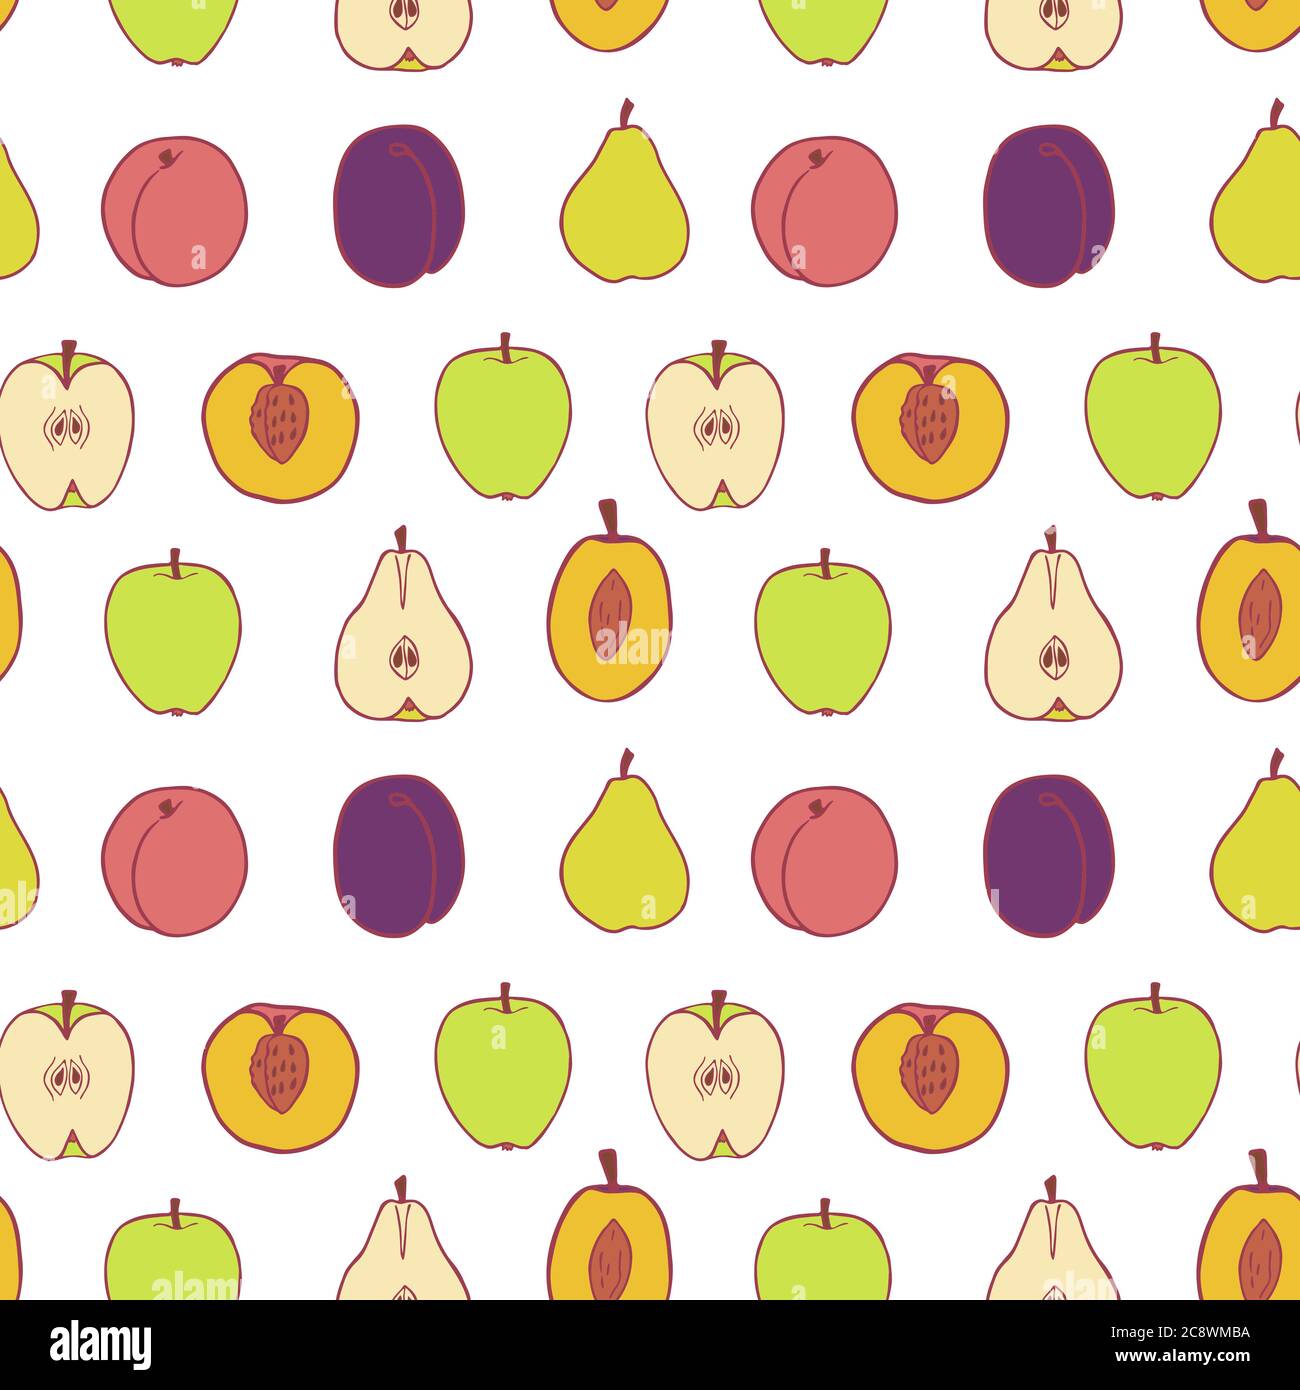 Fruit plum, pear, peach and apple seamless pattern, great design for any purposes. Hand drawn fabric texture pattern. Healthy food background. Vector flat style summer graphic. On white background. Stock Vector